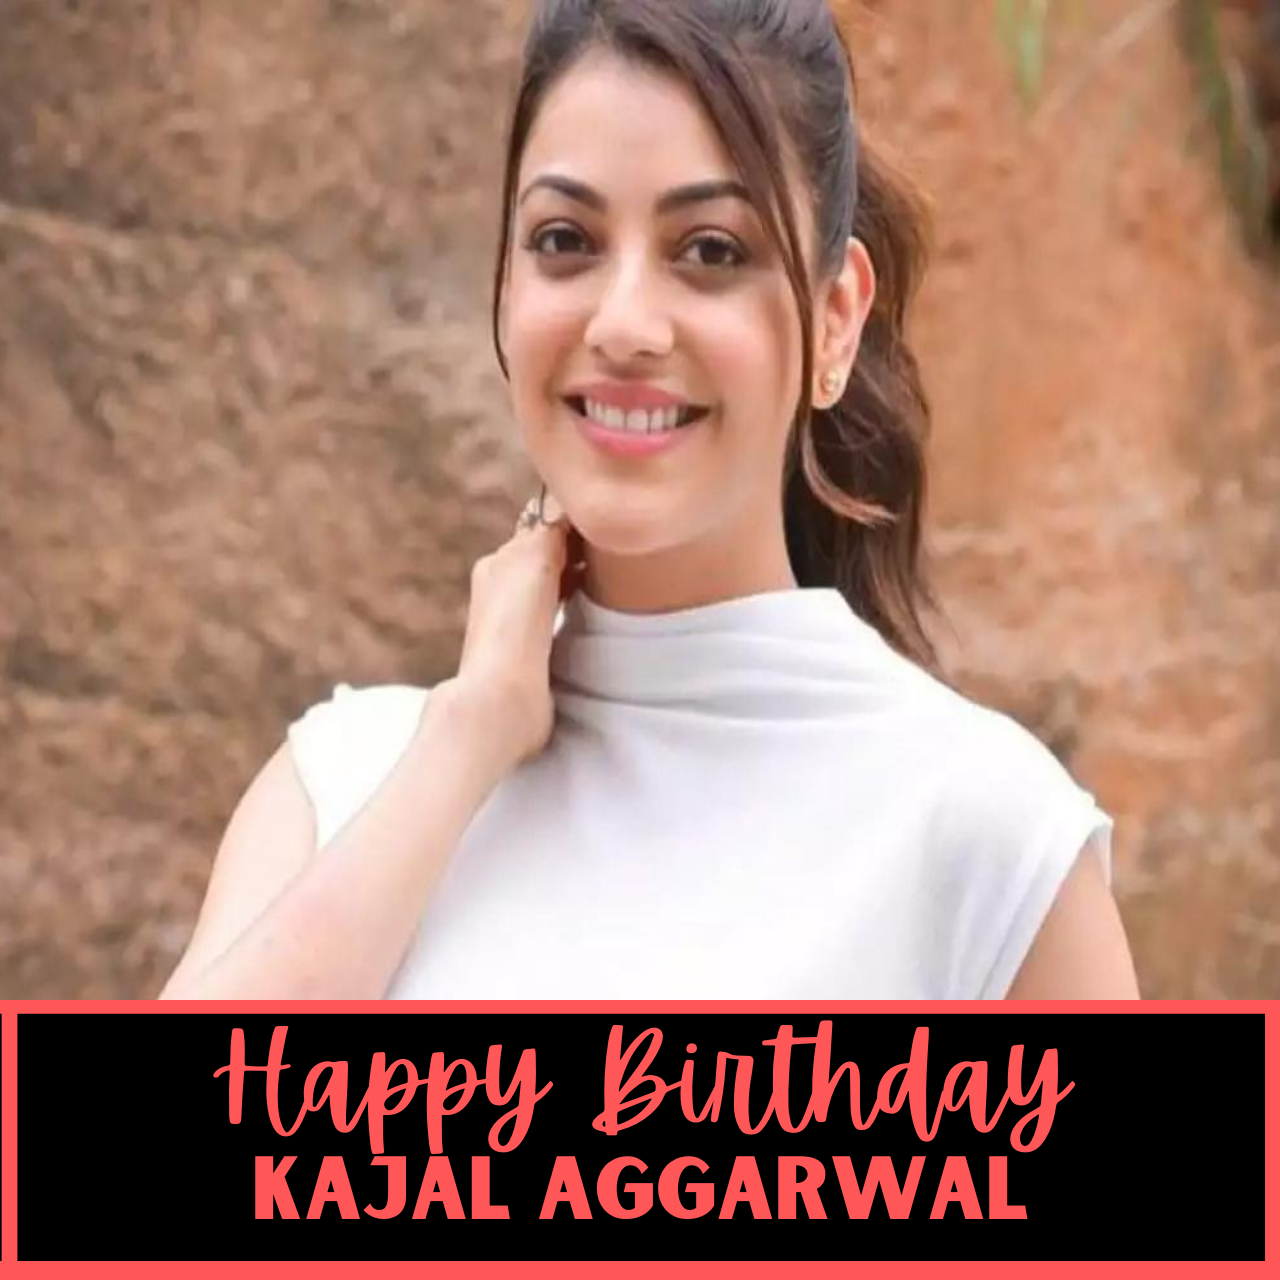 Happy Birthday Kajal Aggarwal: Quotes, Images, Wishes, Messages, and Greetings to greet Kaju